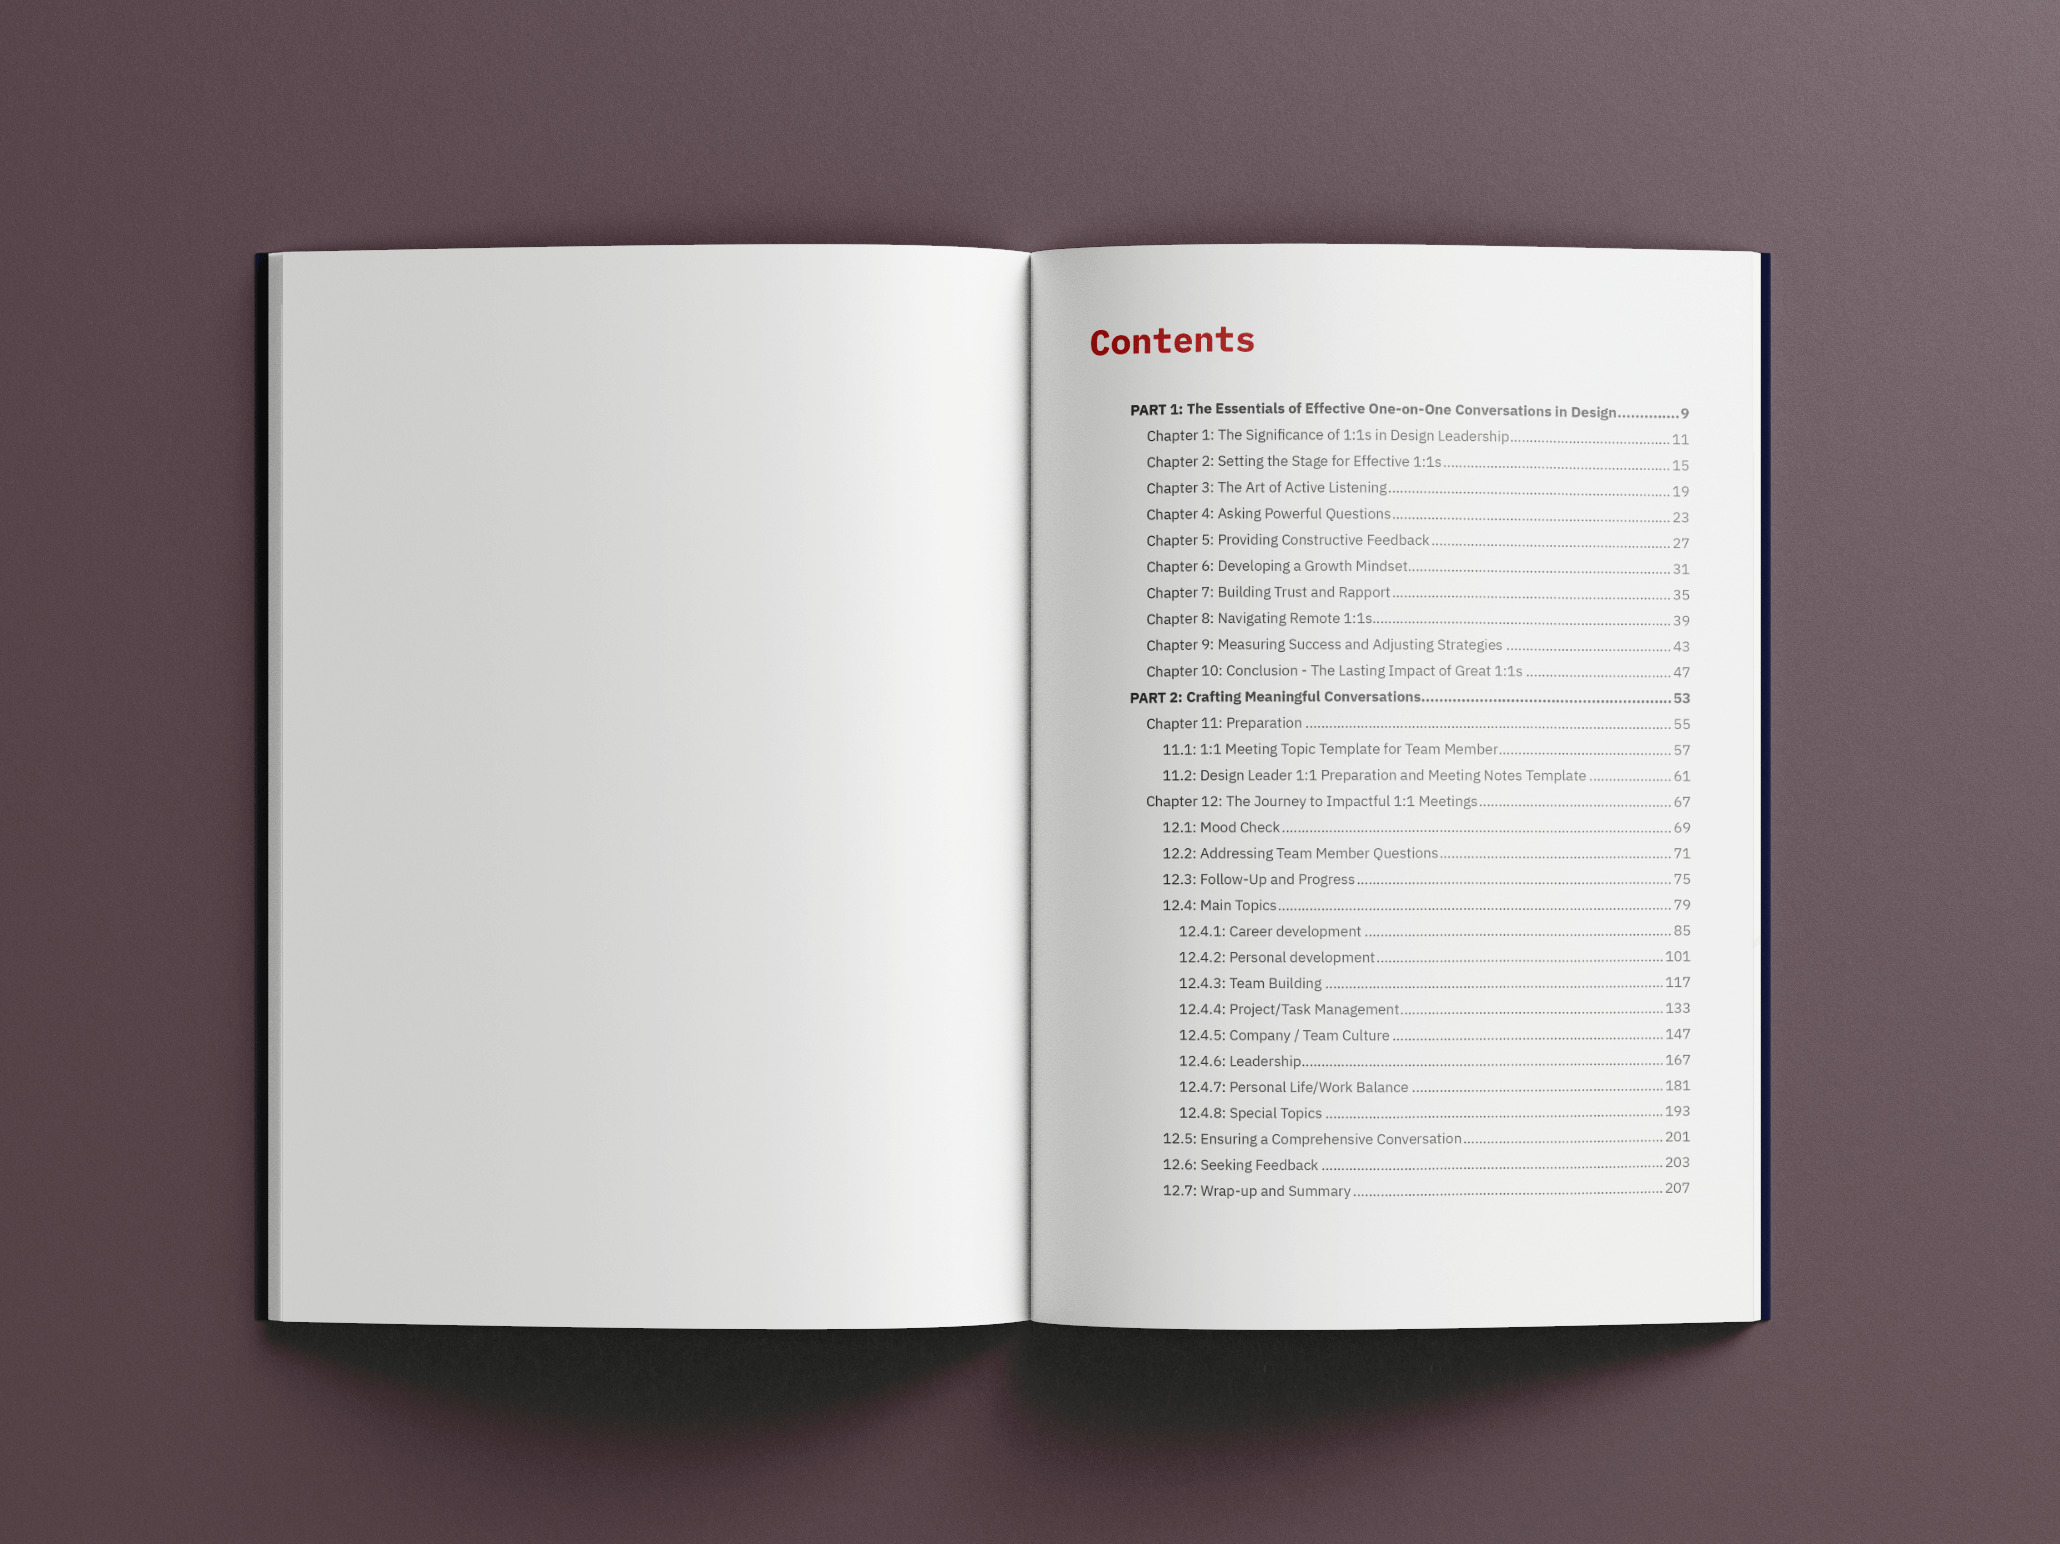 Open book showing a table of contents for 'Leading Through Connection,' outlining chapters on 1:1 meetings in design leadership, active listening, and building trust, among other topics.